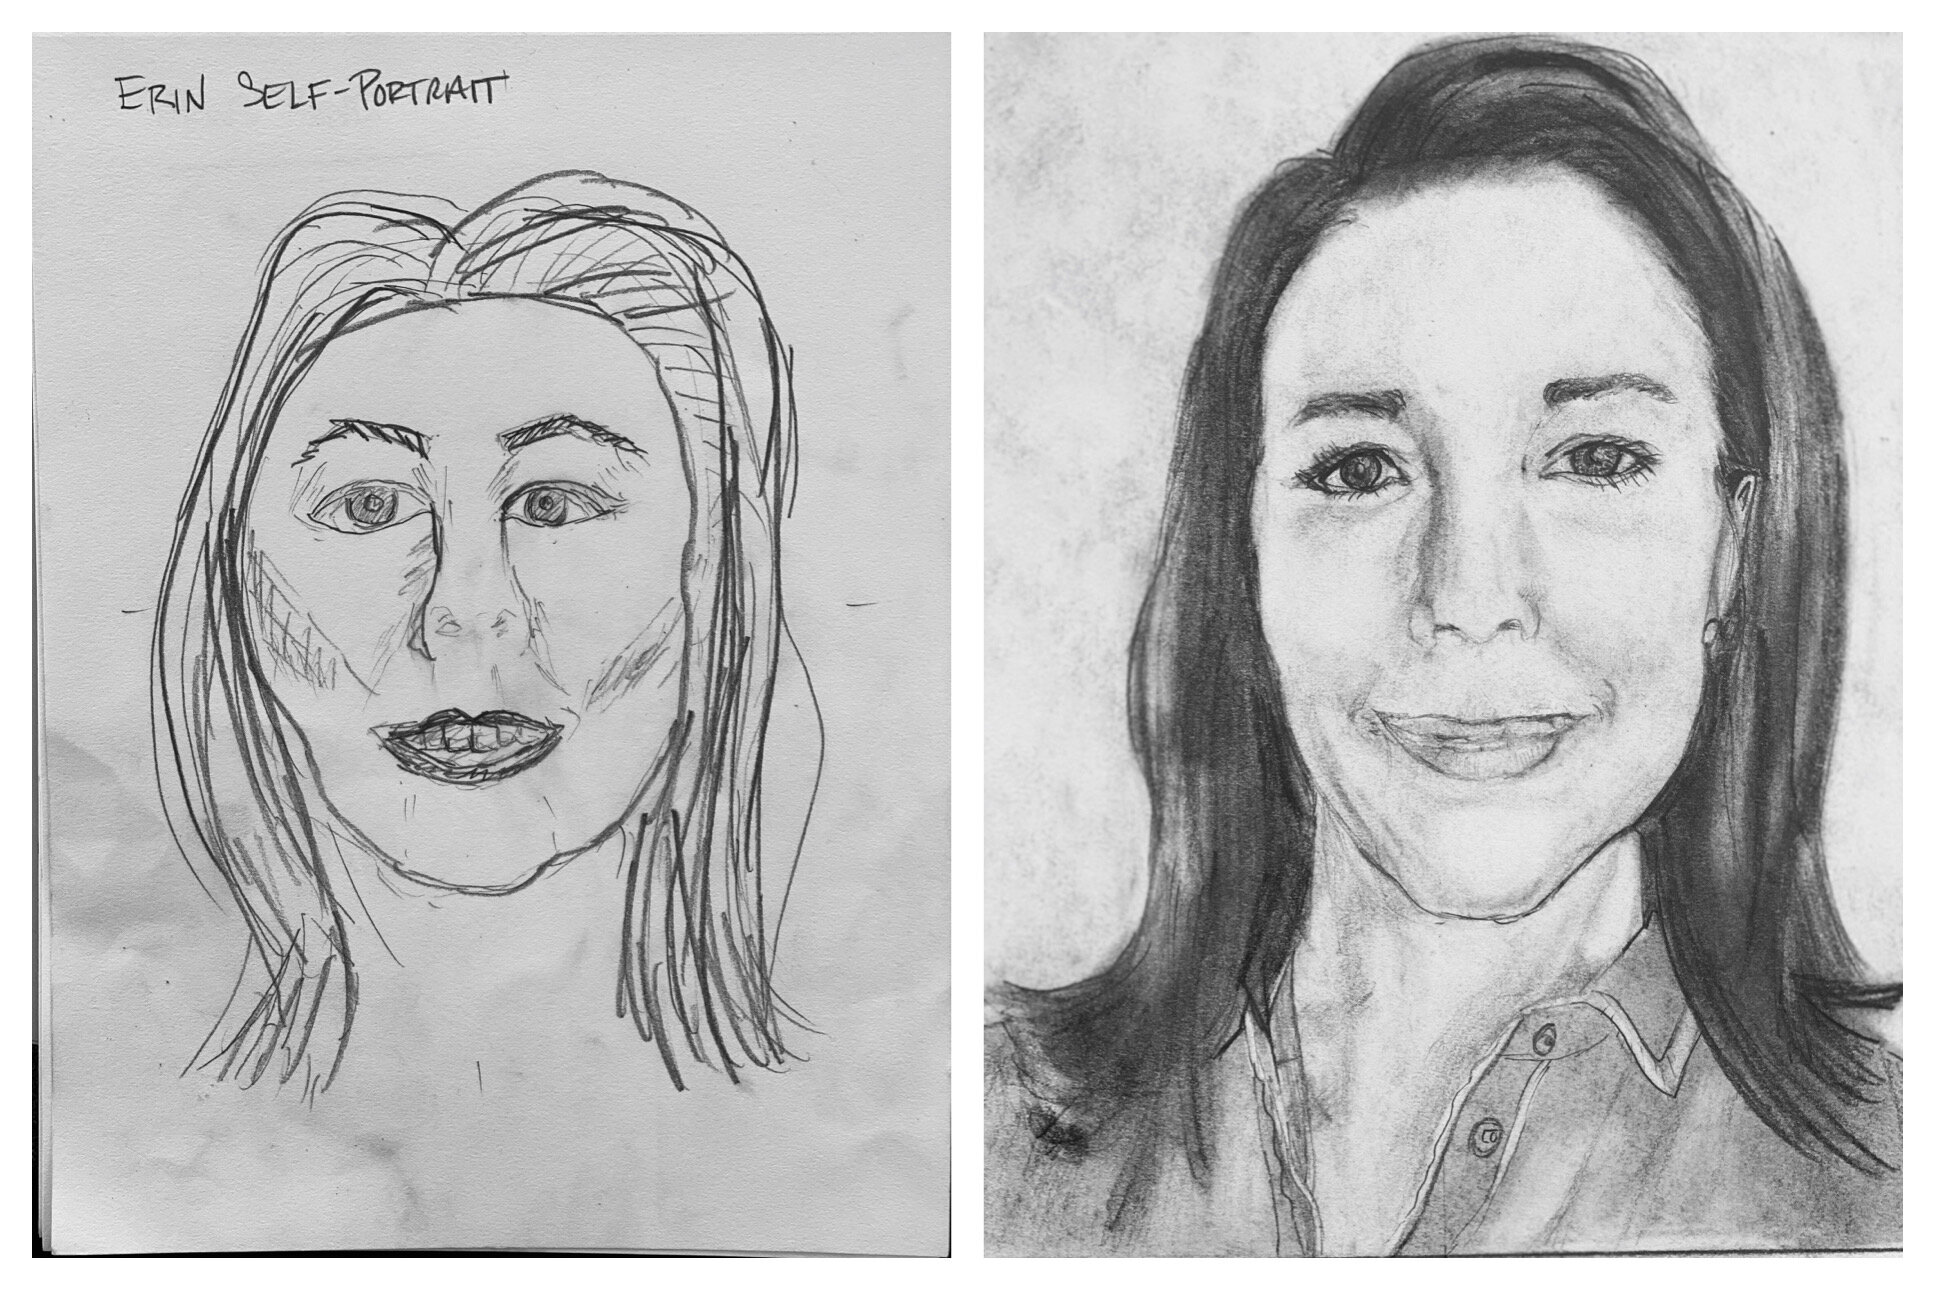 Erin's Before and After Self-Portraits.  Virtual Workshop November 2020